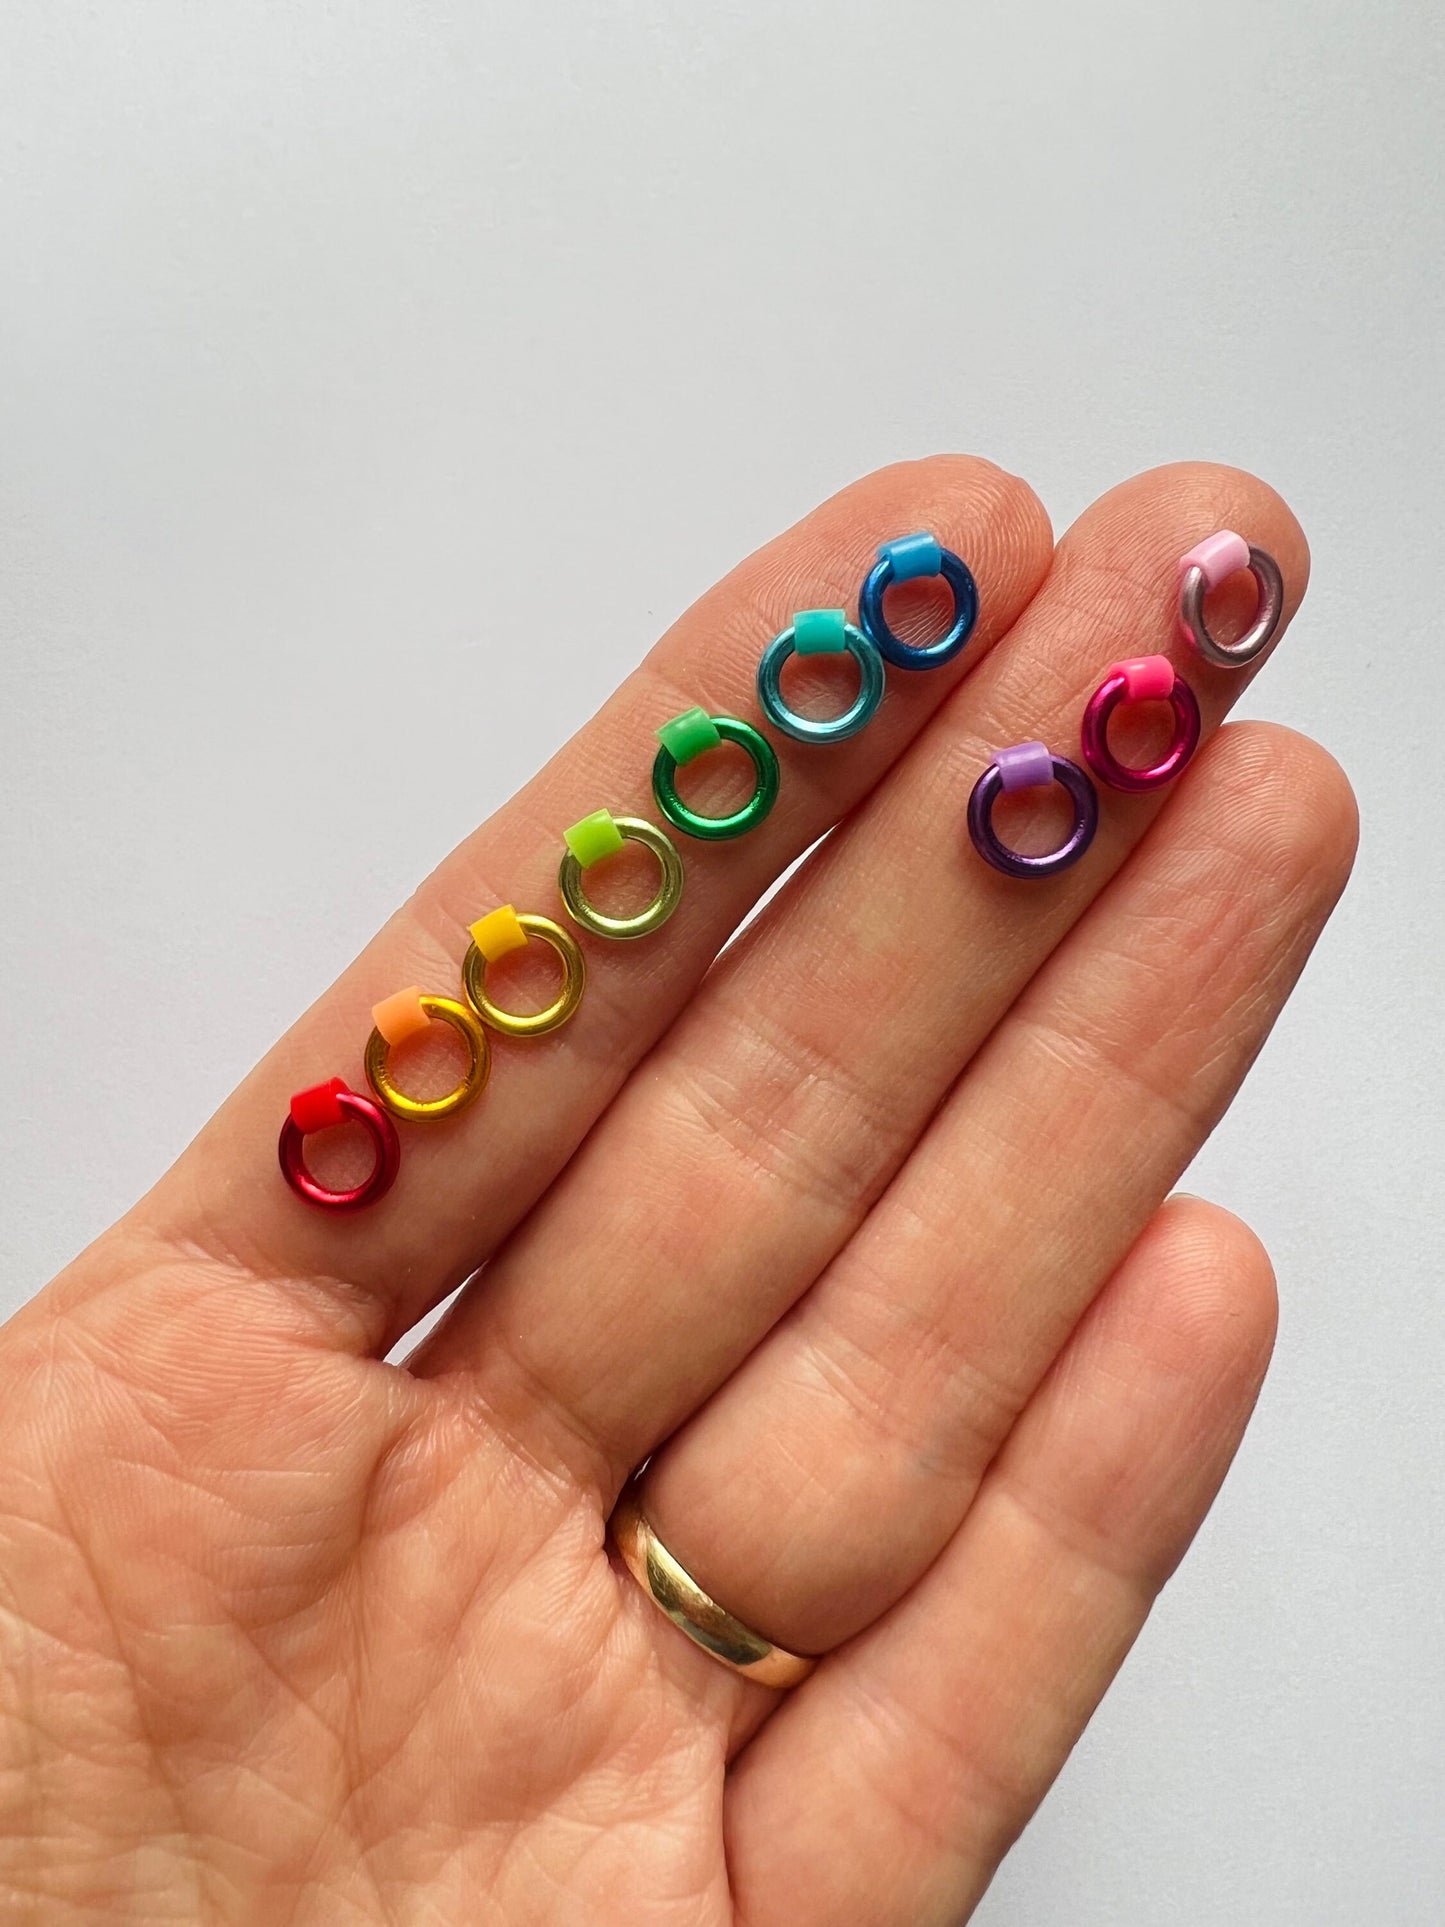 Rainbow Stitch Markers for Sock, Lace & Knitting - Snag Free in 4 Sizes